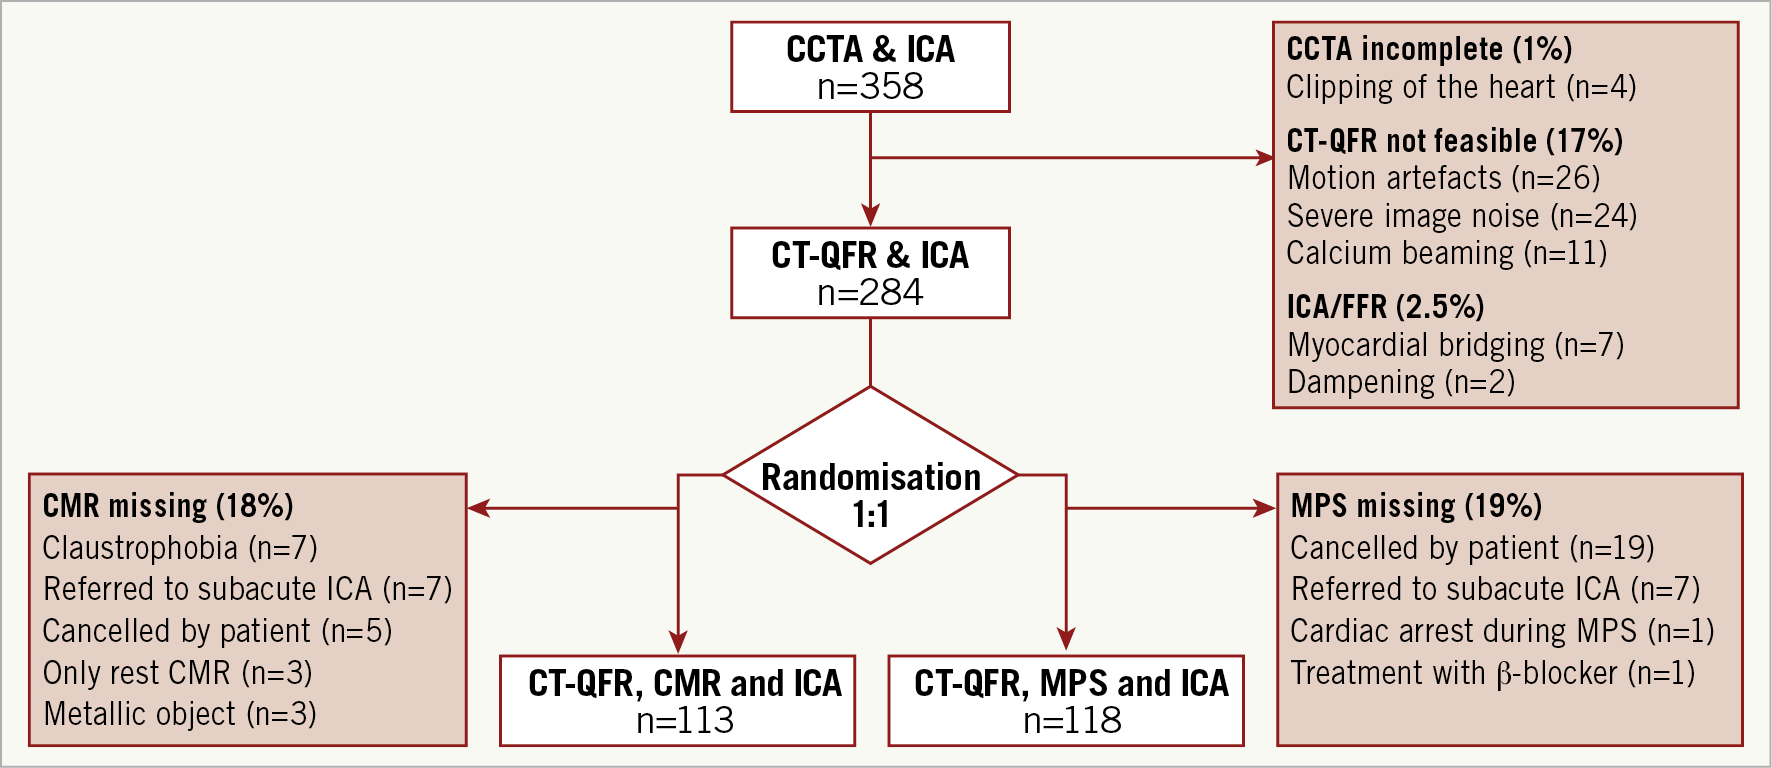 Figure 1. Study flow chart. CCTA: coronary computed tomography angiography; CMR: cardiovascular magnetic resonance; CT-QFR: CT-derived quantitative flow ratio; FFR: fractional flow reserve; ICA: invasive coronary angiography; MPS: myocardial perfusion scintigraphy